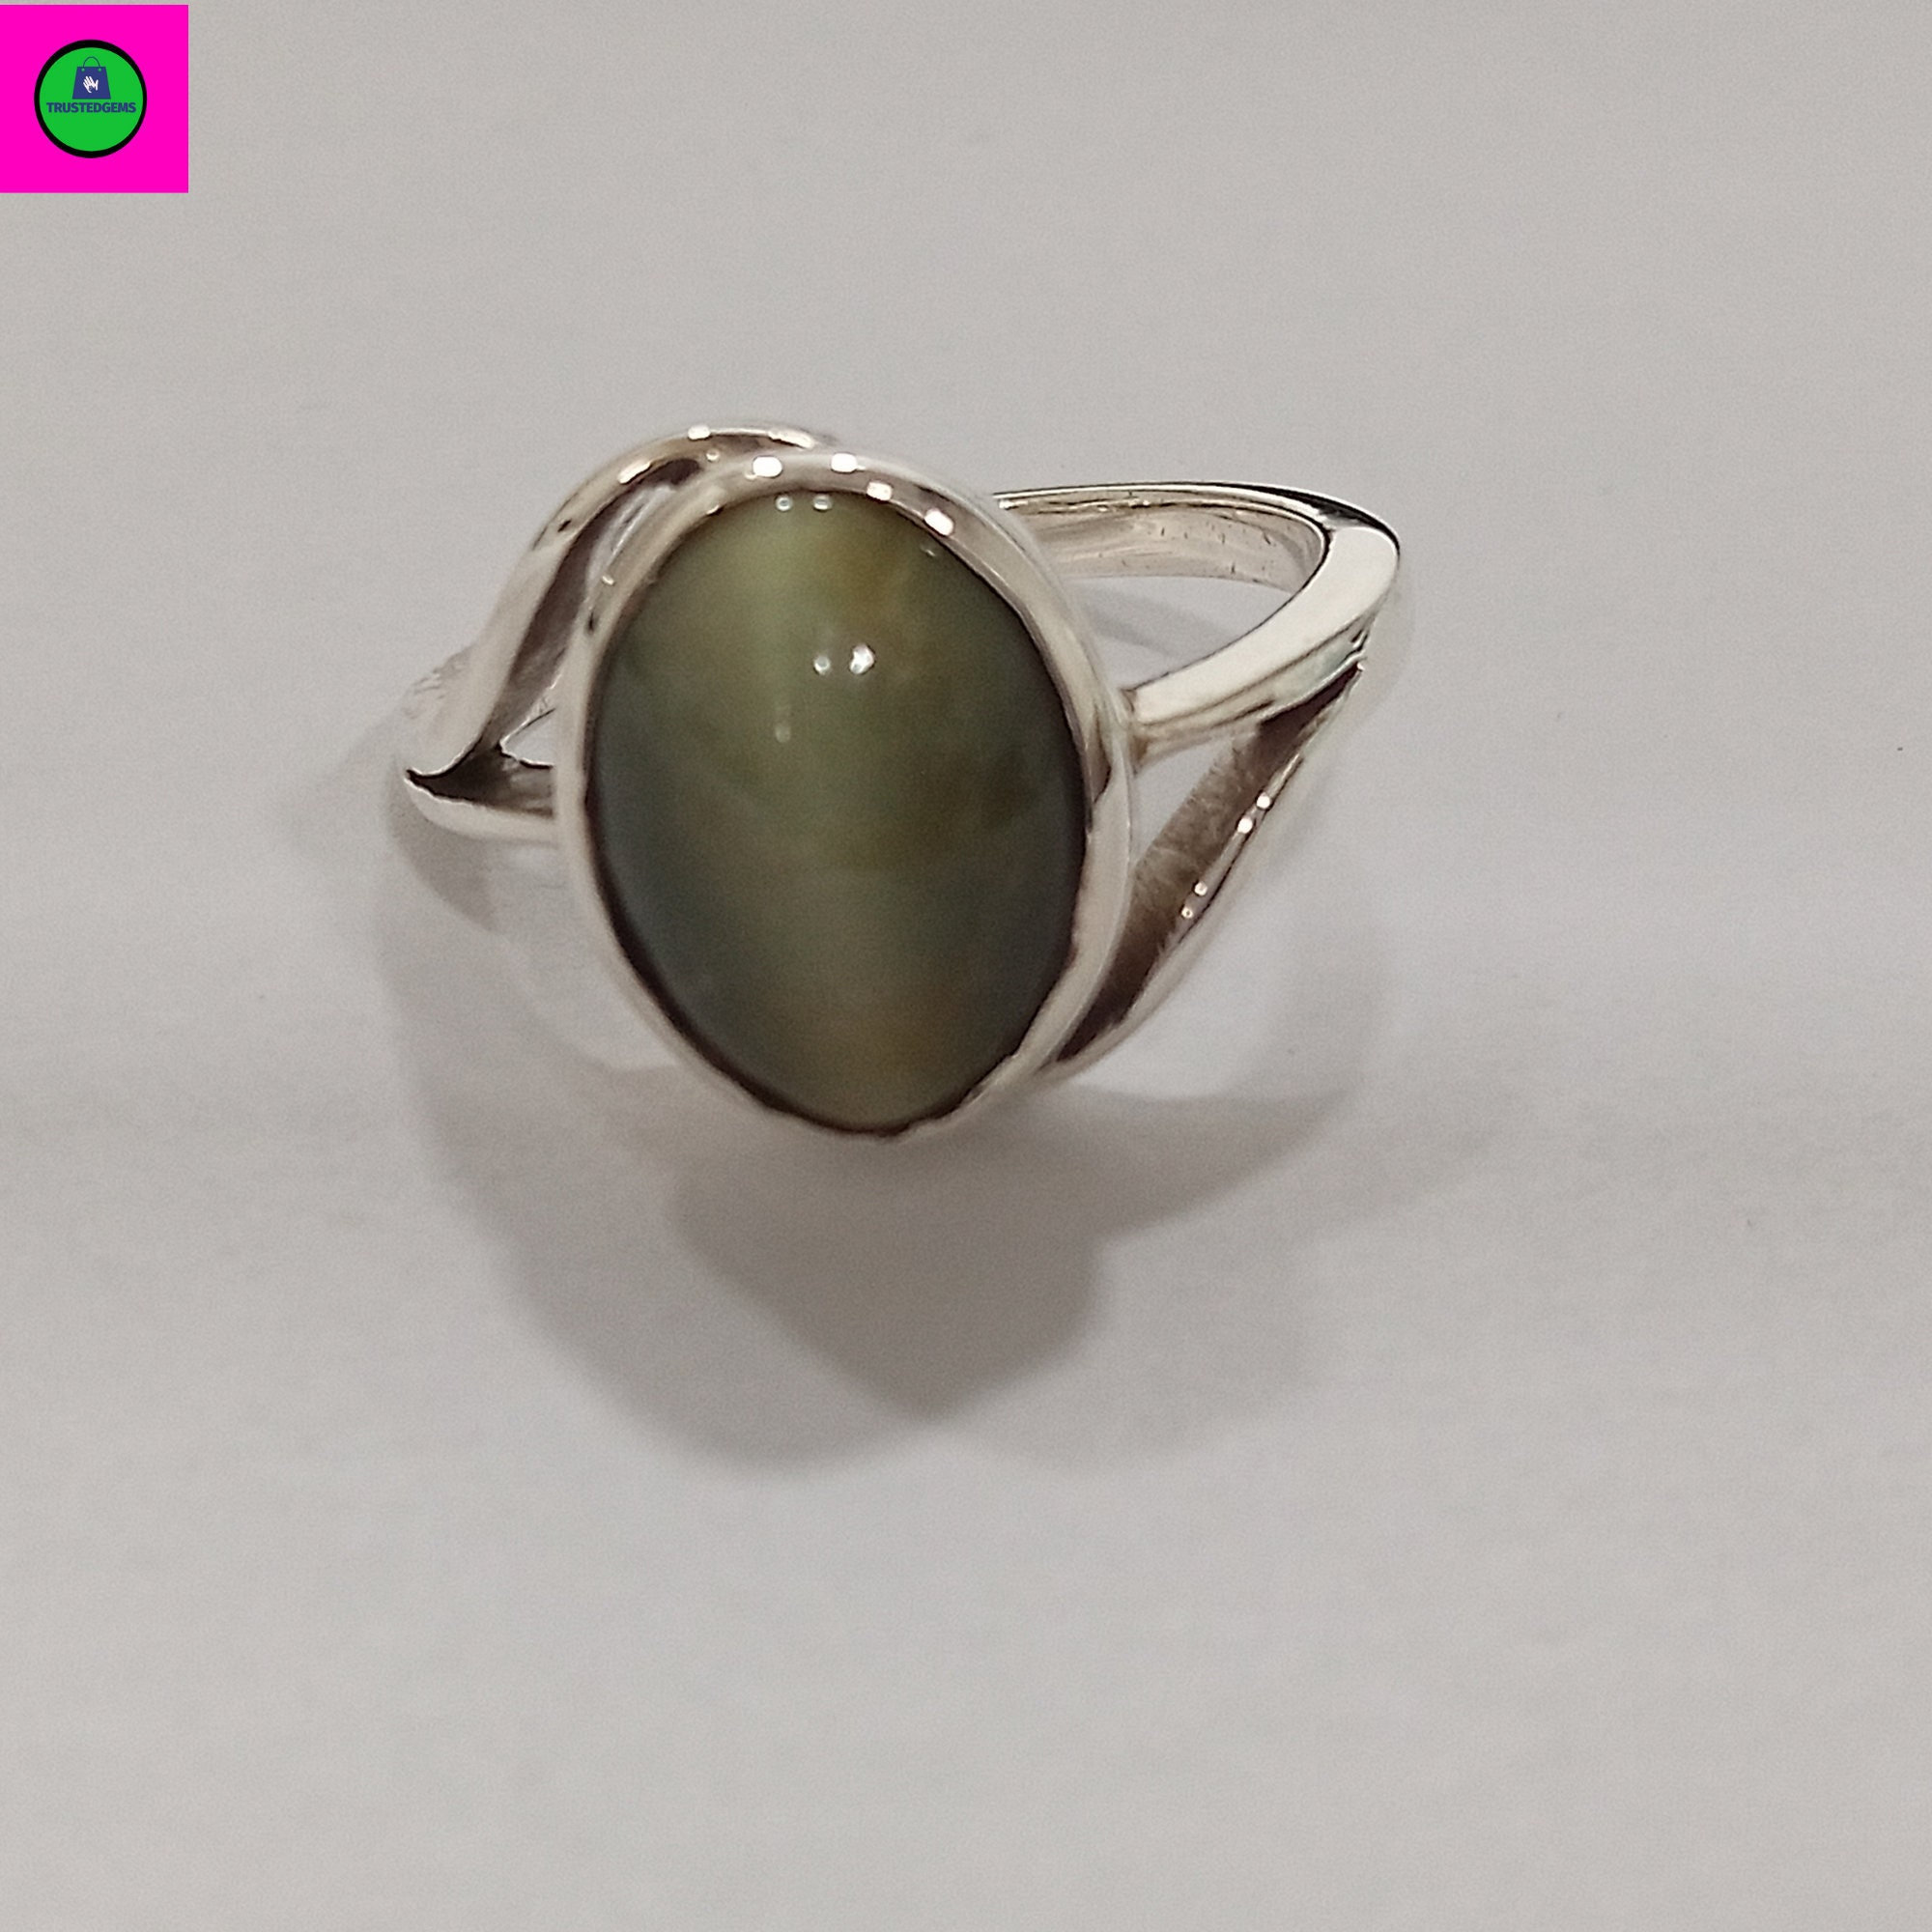 Buy Ceylonmine cats eye Stone Lehsuniya Unheated Stone Certified Stone  Cat's Eye Gold Plated Ring Online at Best Prices in India - JioMart.